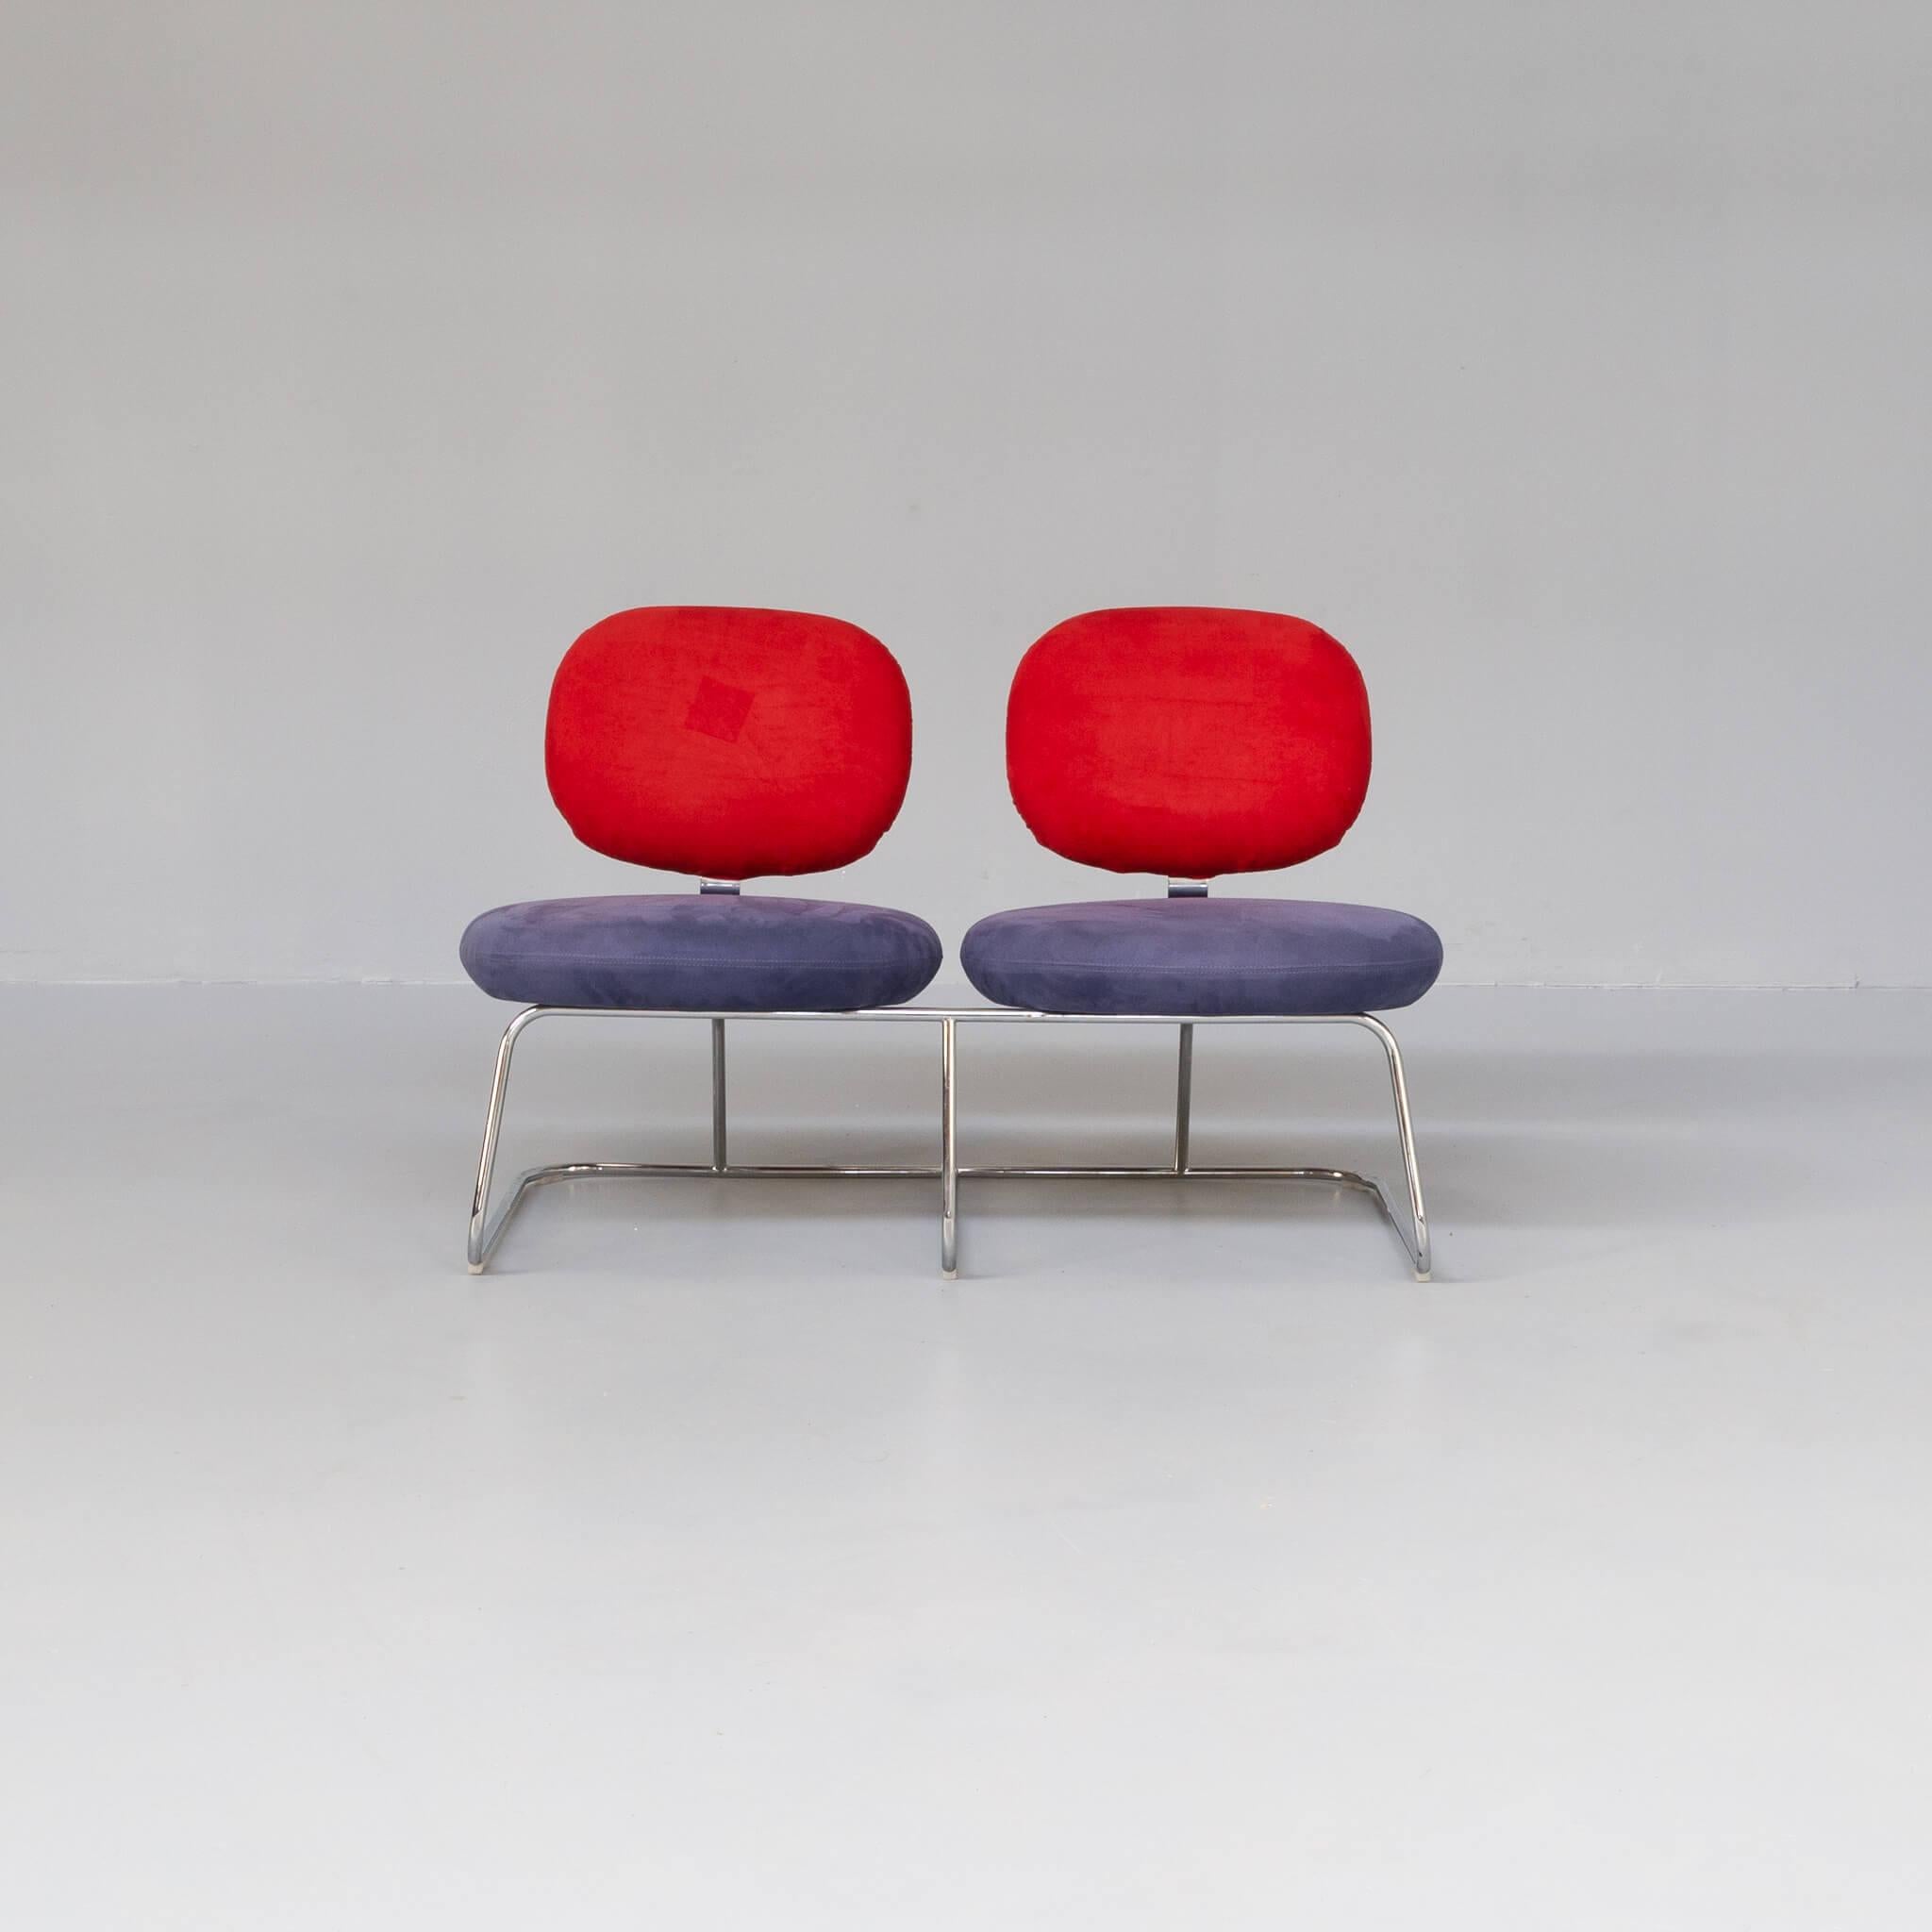 The Vega bench consists of two round cushions per back and seat, and a metal band that connects both to a metal base.
Vega is fun as a multiple seat, with a particularly pleasant seat without being lazy. The Vega sofa has been designed in a serie